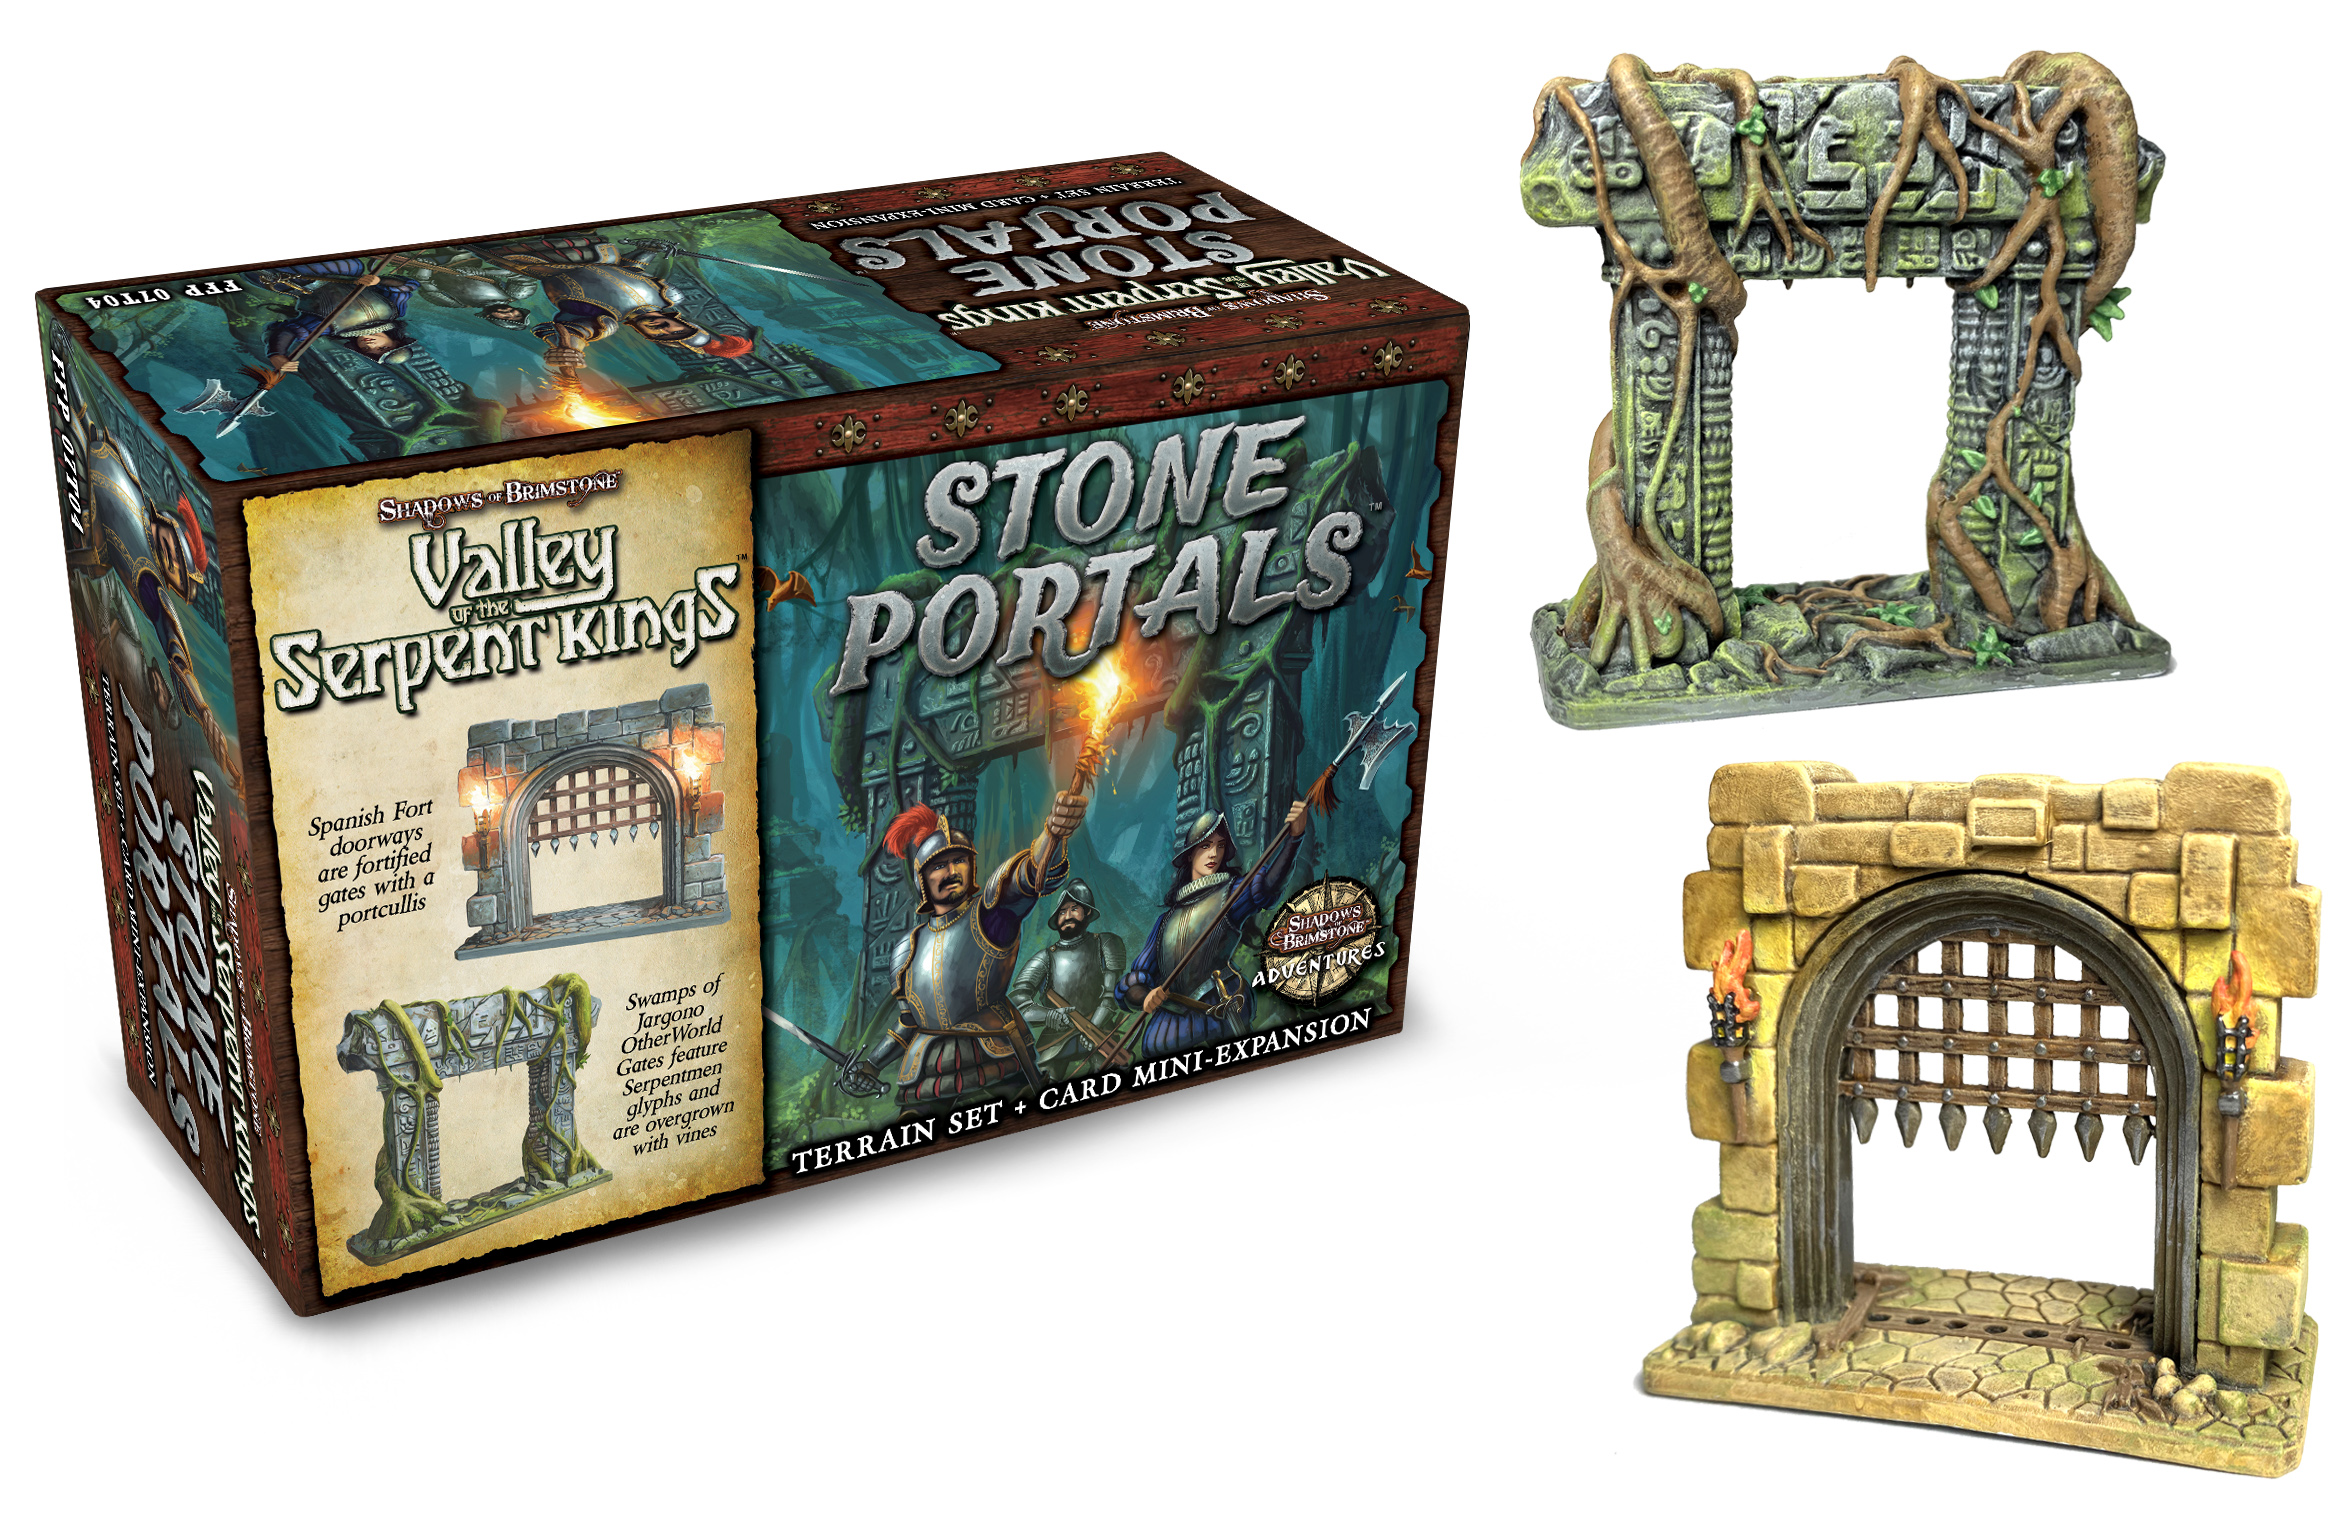 Shadows of Brimstone: Valley of the Serpent Kings: Stone Portals 